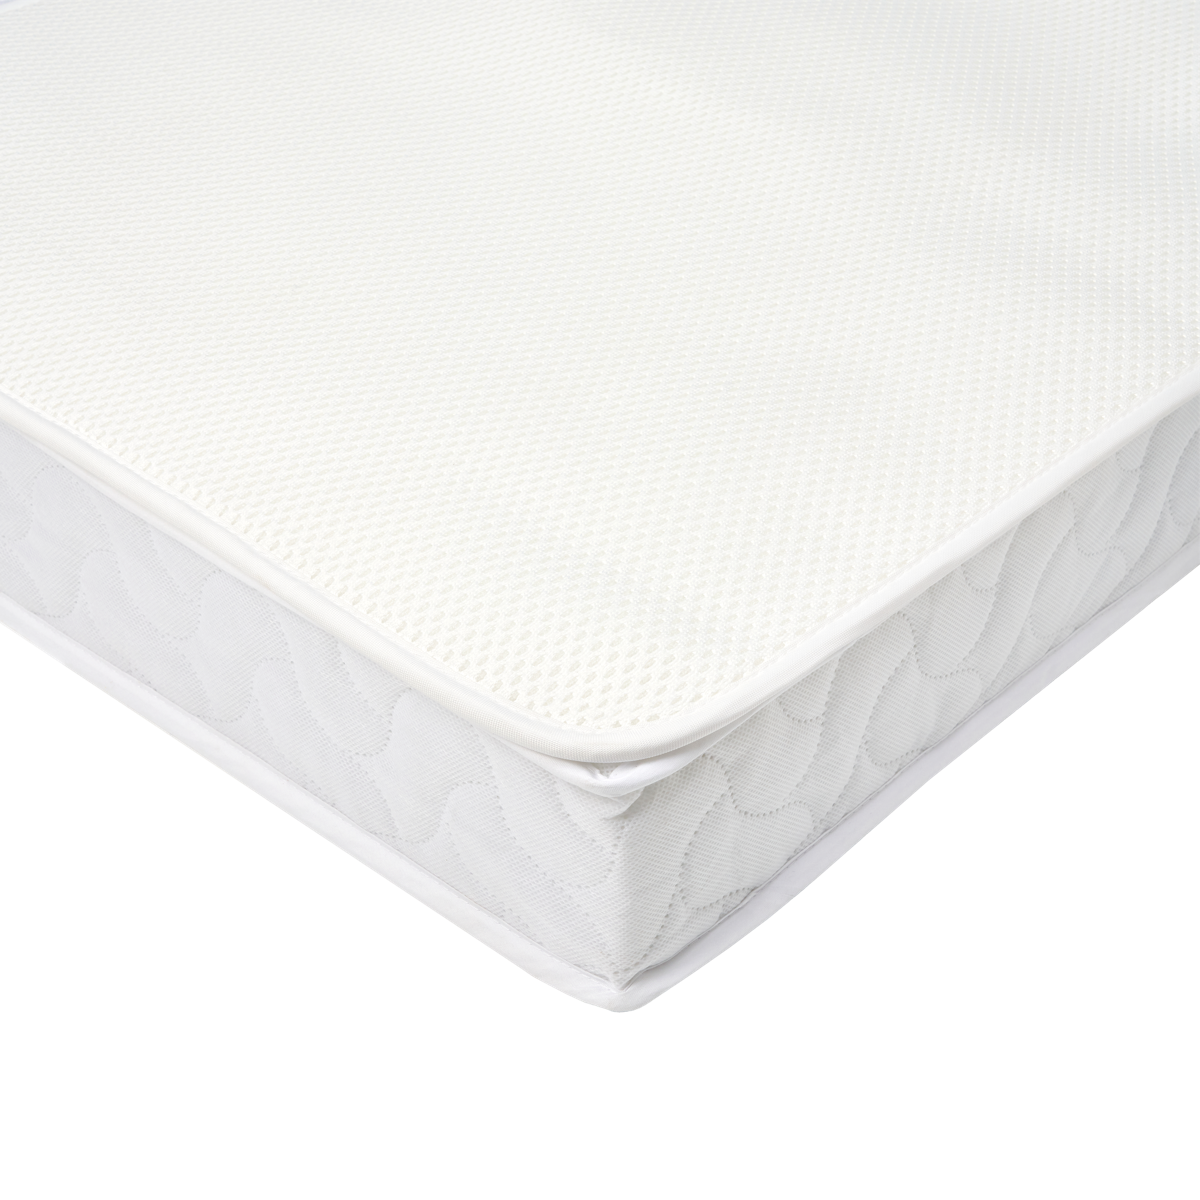 Tutti Bambini Cot/Cot Bed Breathable Mattress Topper Protector